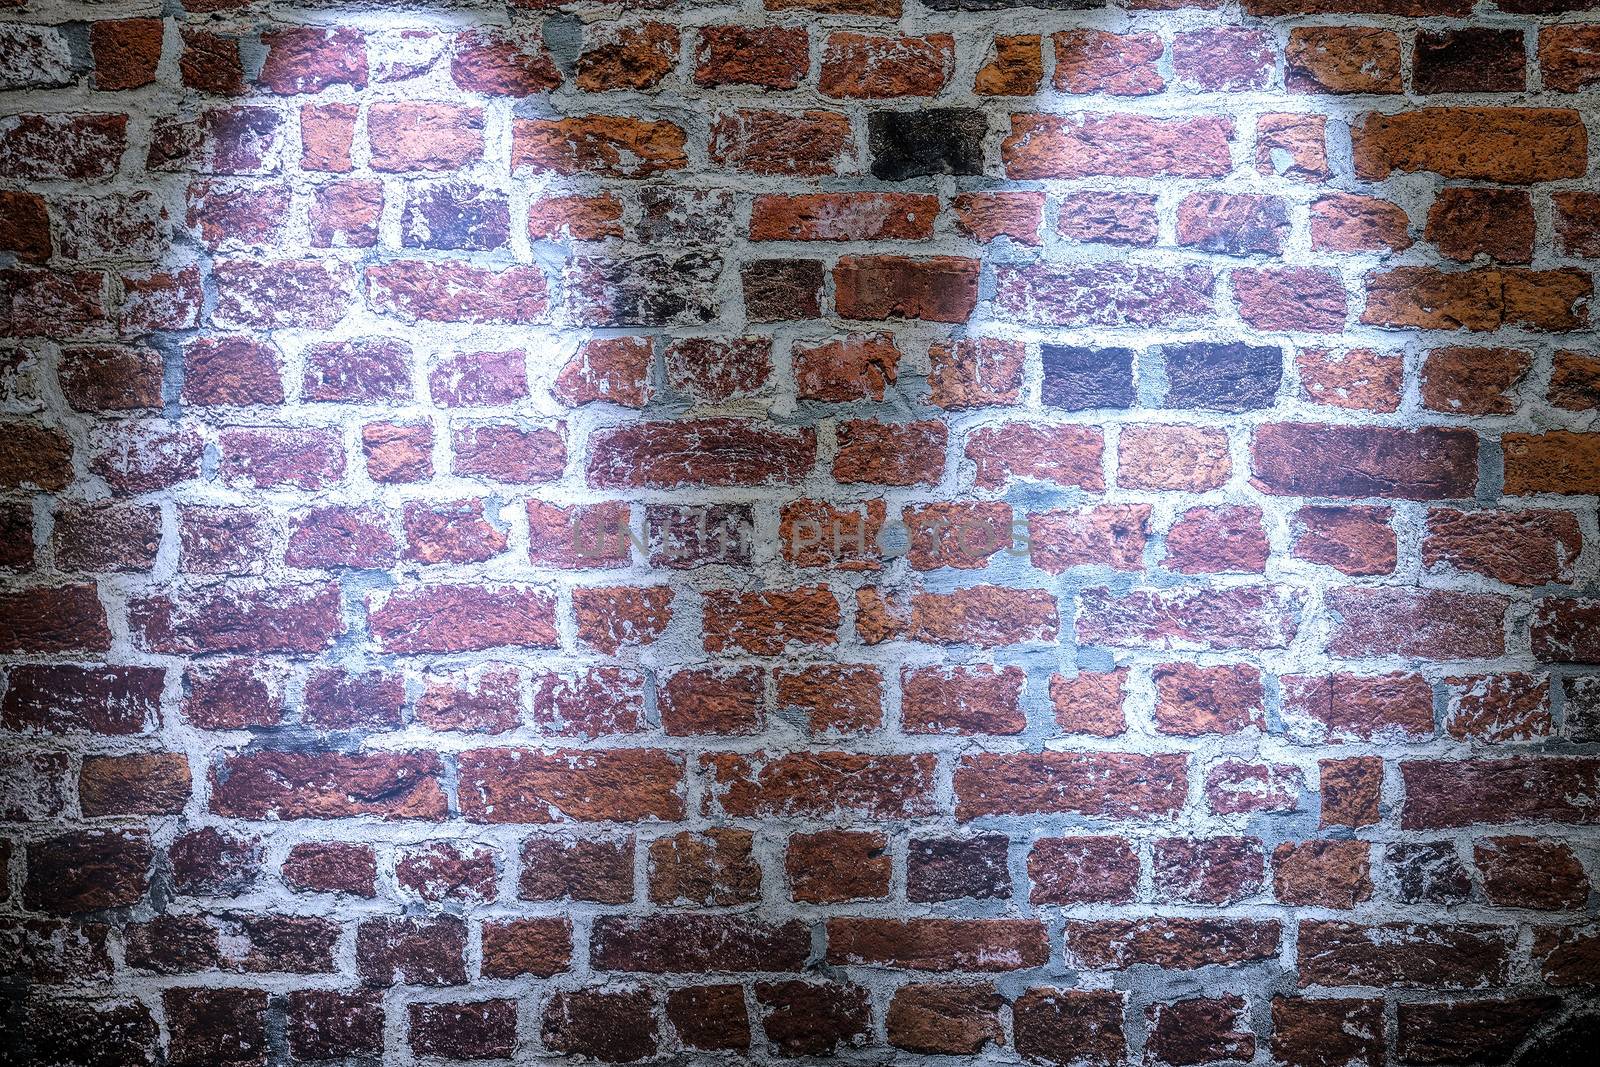 Aged and weathered brick wall textures with bright spotlight illumination